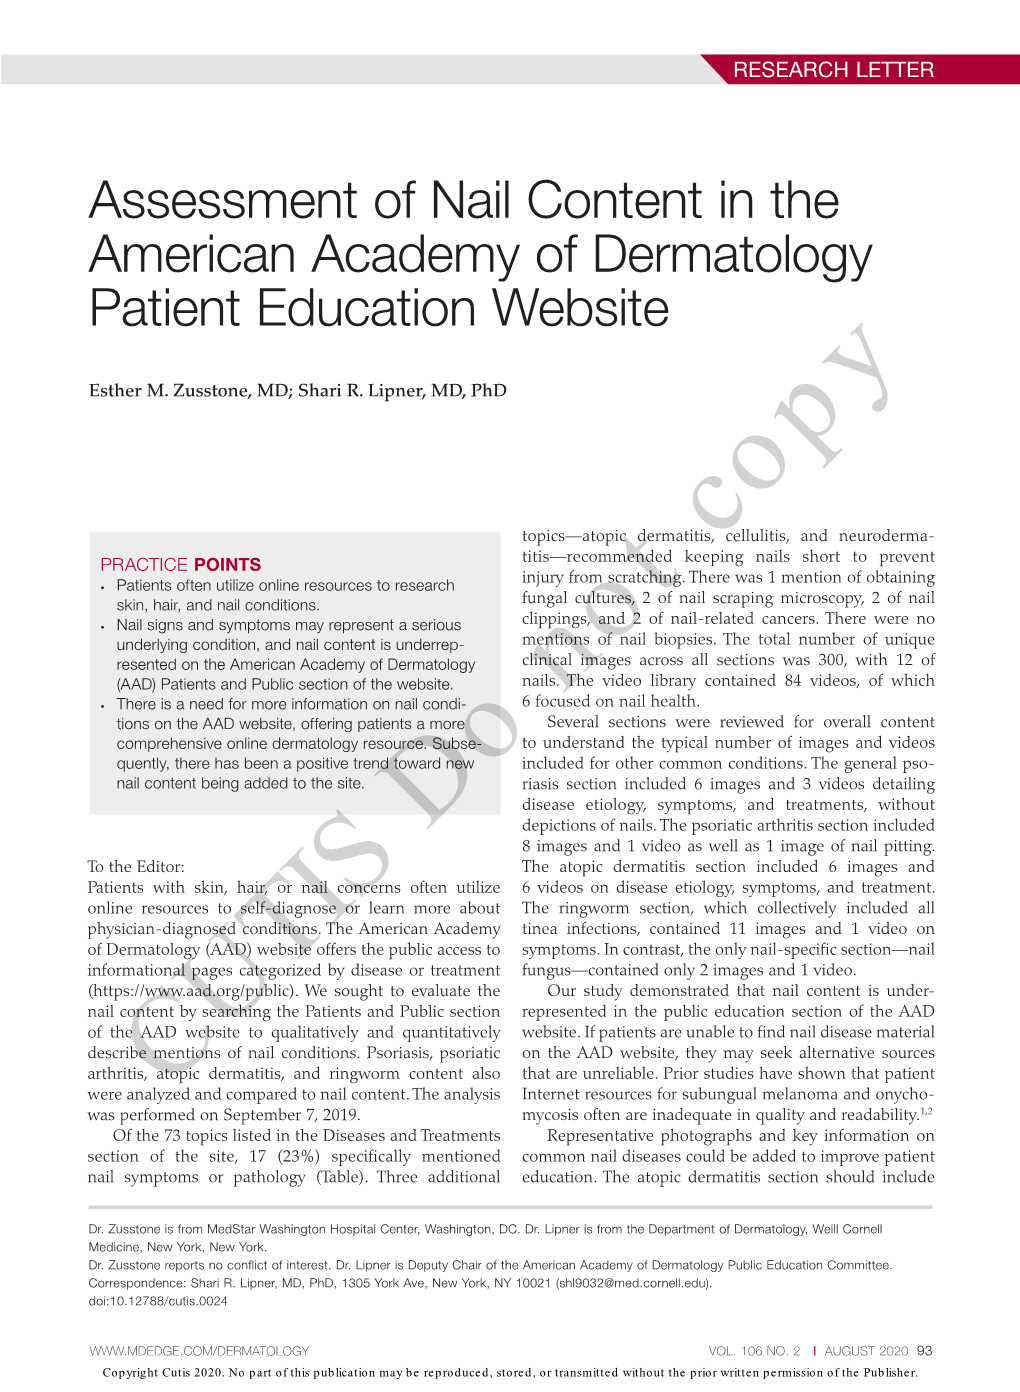 Assessment of Nail Content in the American Academy of Dermatology Patient Education Website